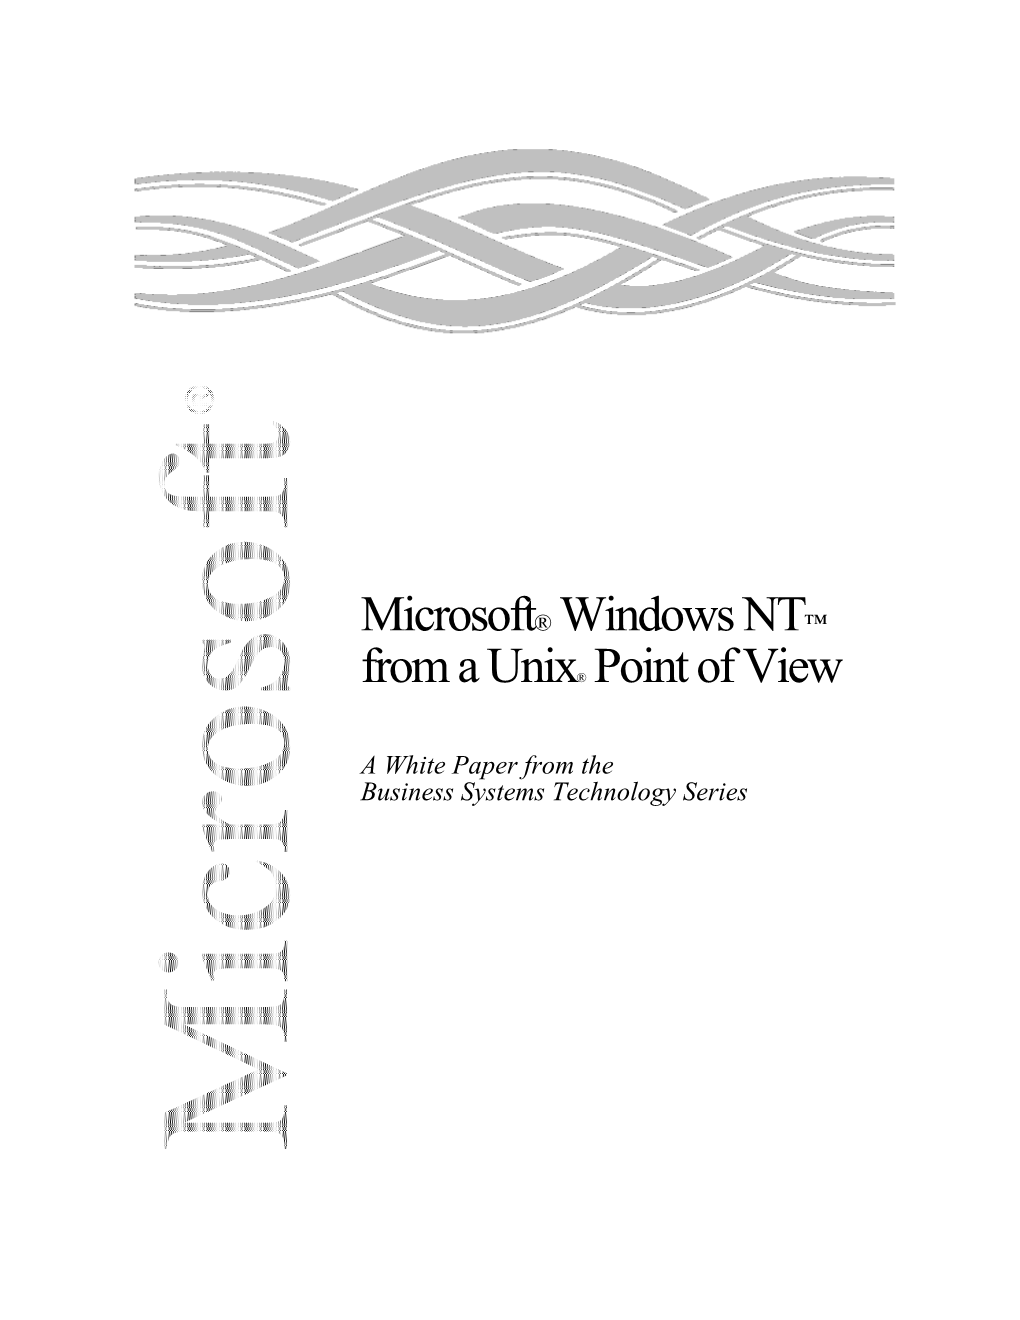 Microsoft Windows NT from a UNIX Point of View 1